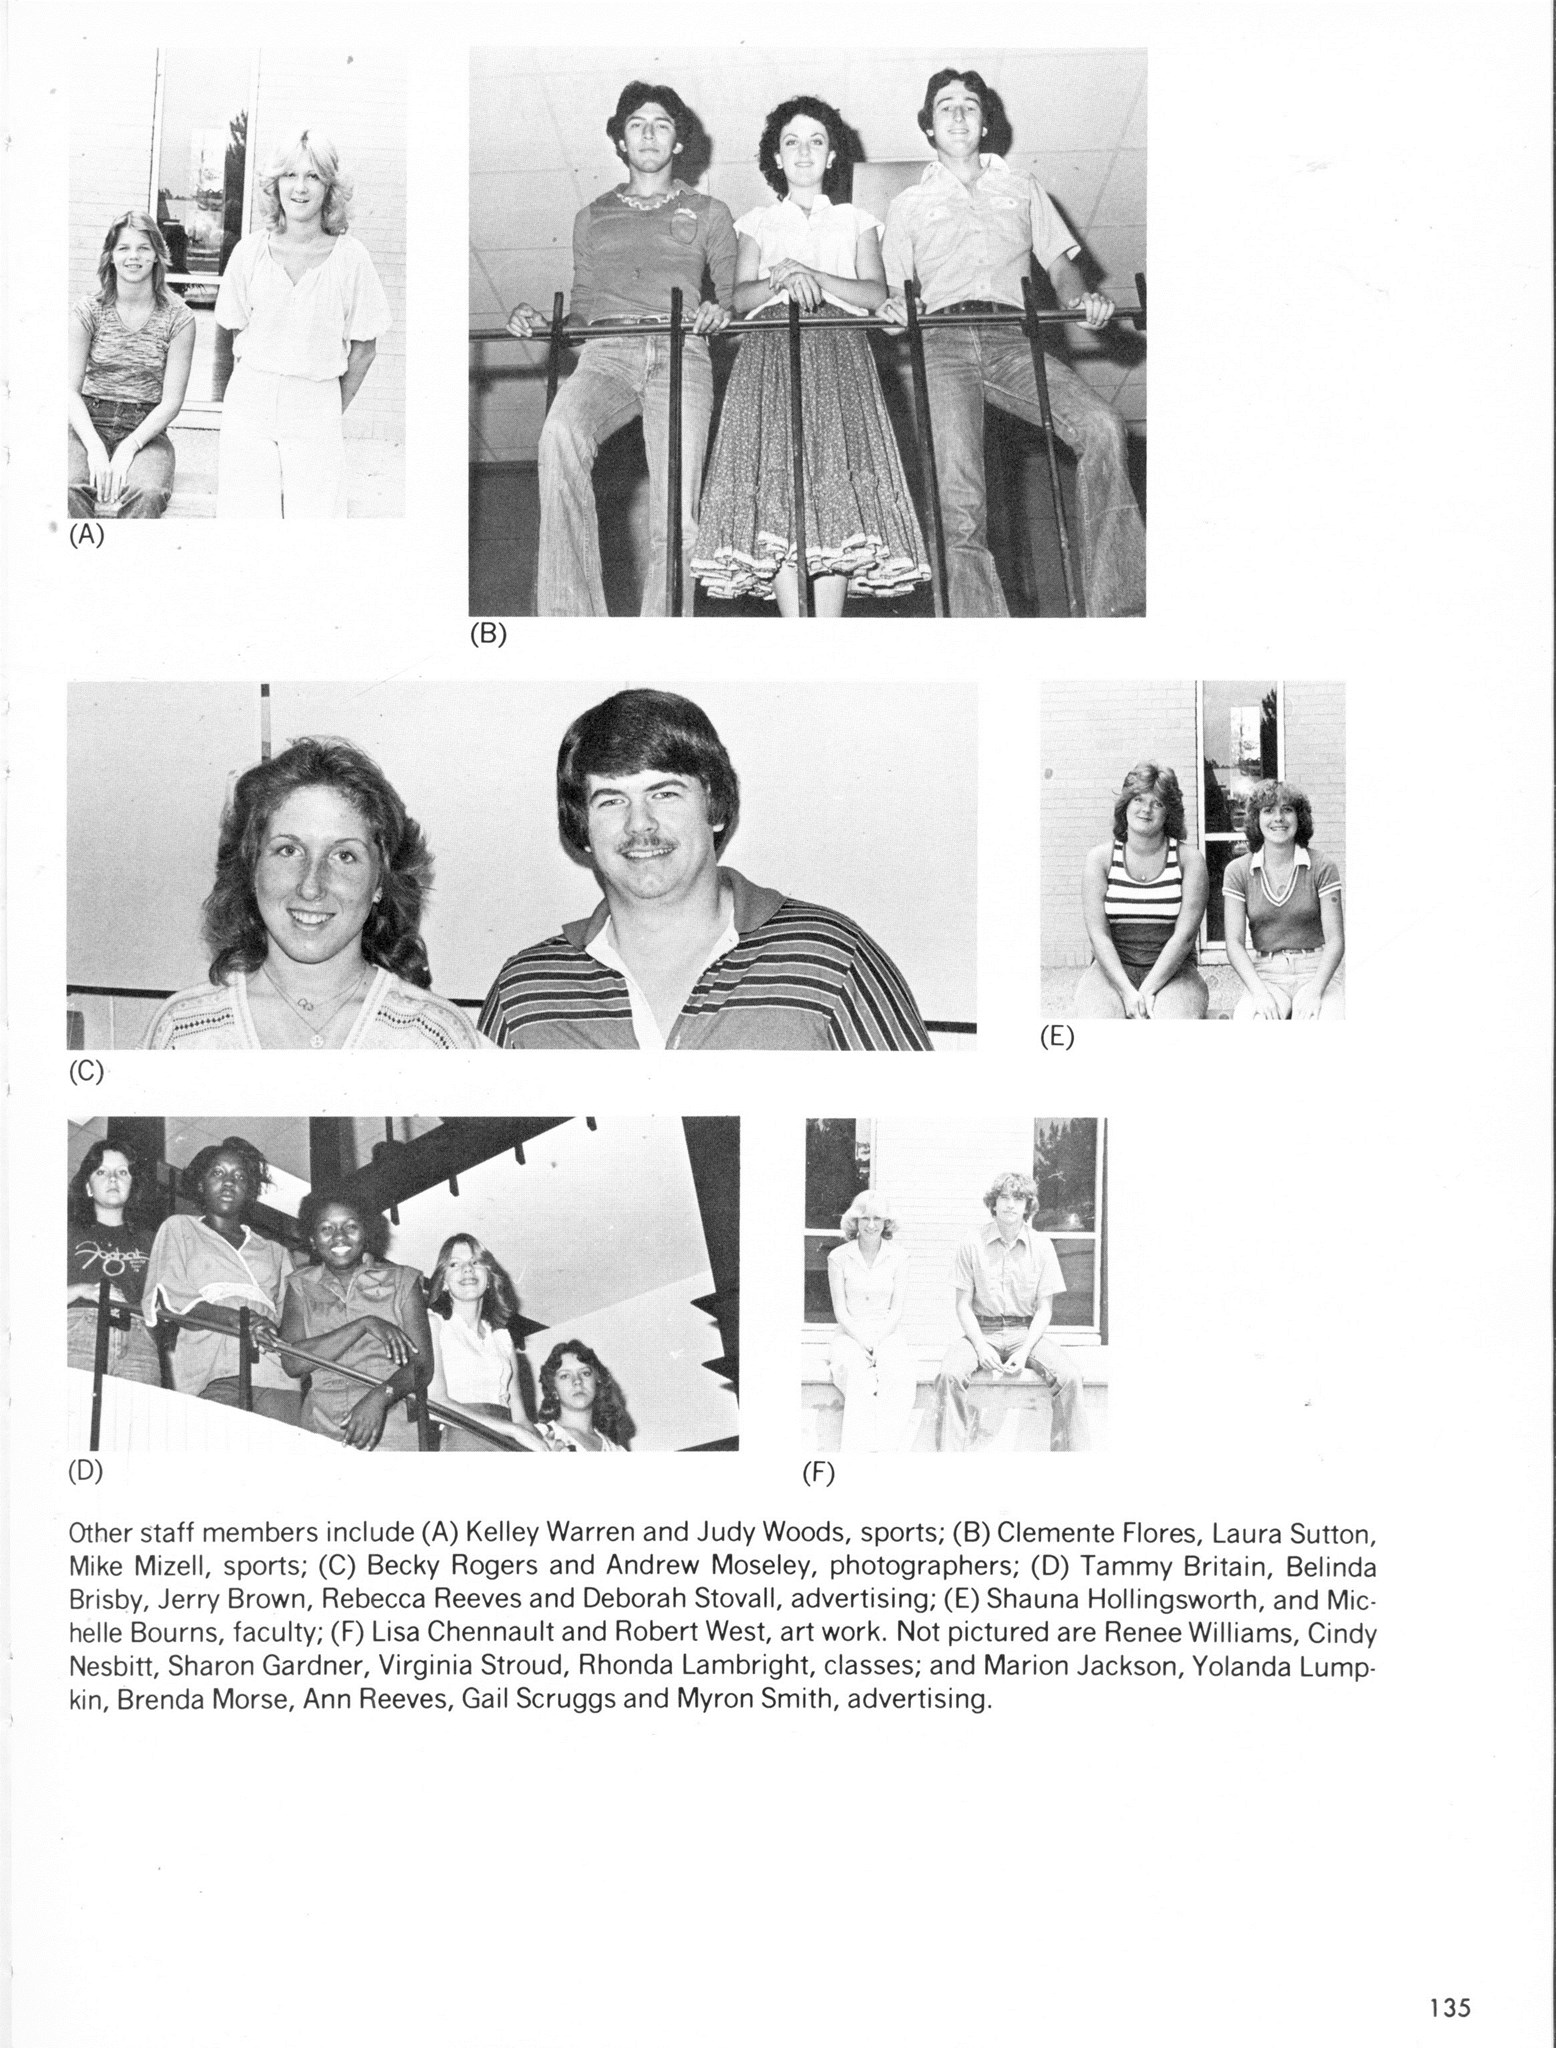 ../../../Images/Large/1978/Arclight-1978-pg0135.jpg